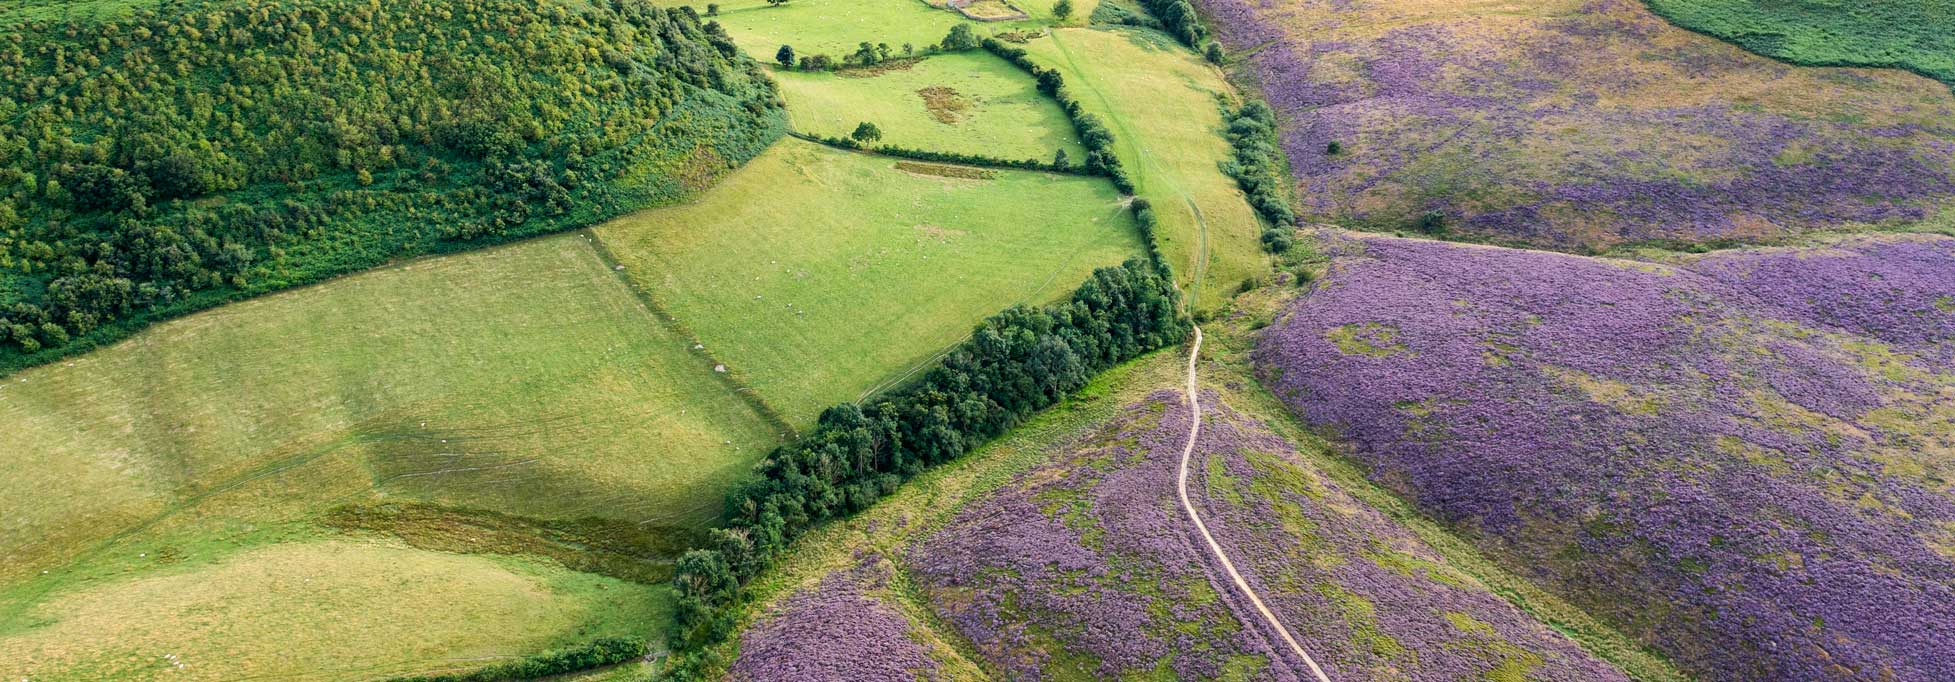 Drone photo looking down onto a moorland, grassland and woodland landscape. Credit Paul Kent.